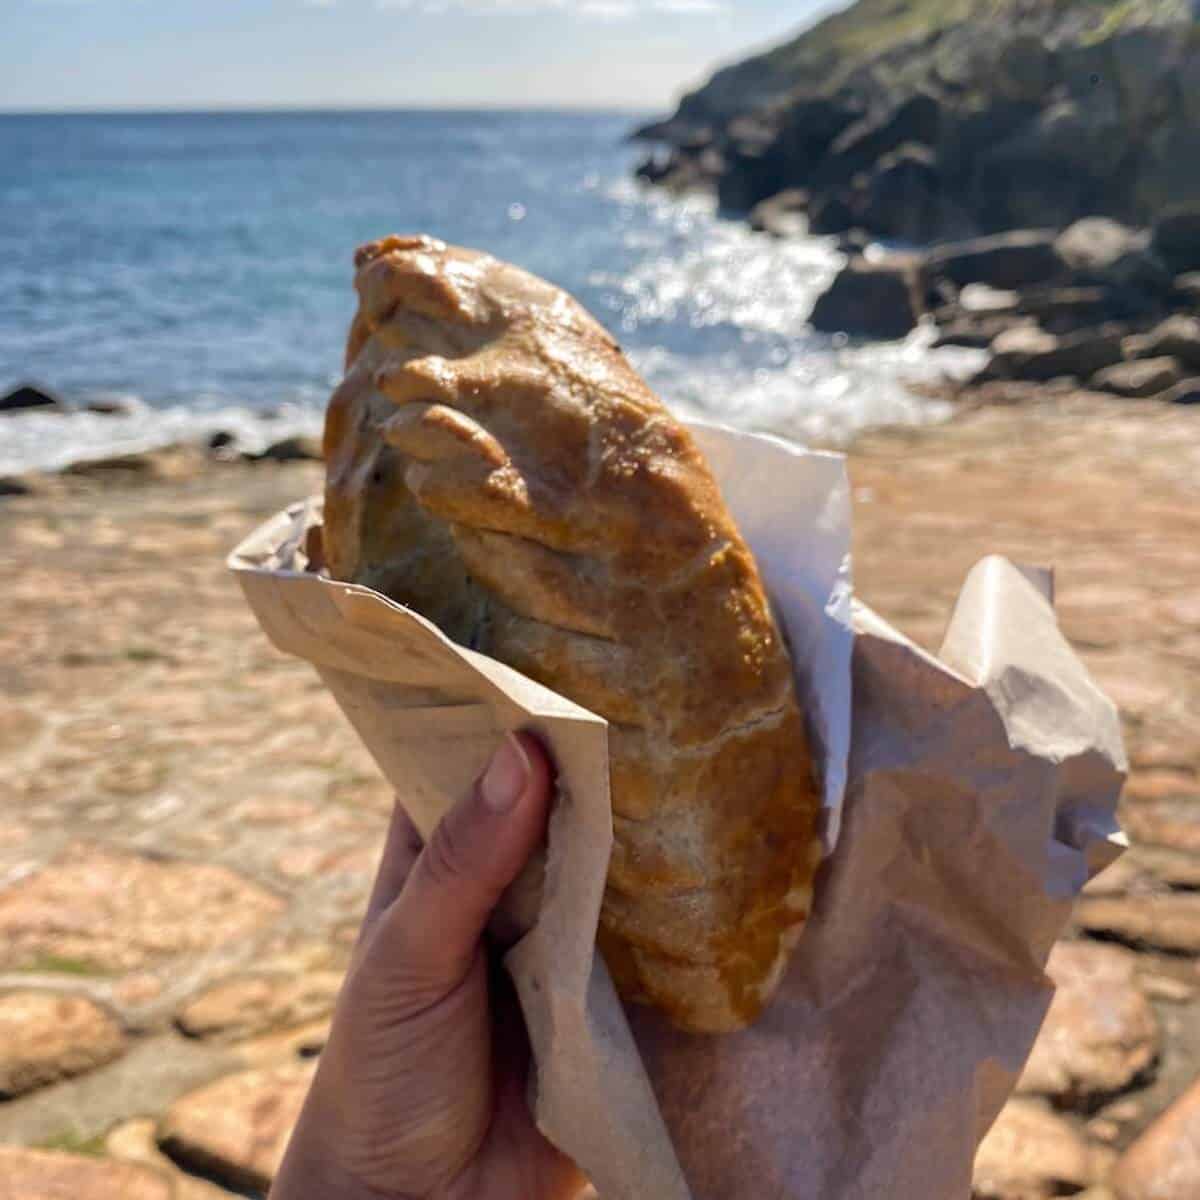 A Cornish pasty on the beach in Cornwall 